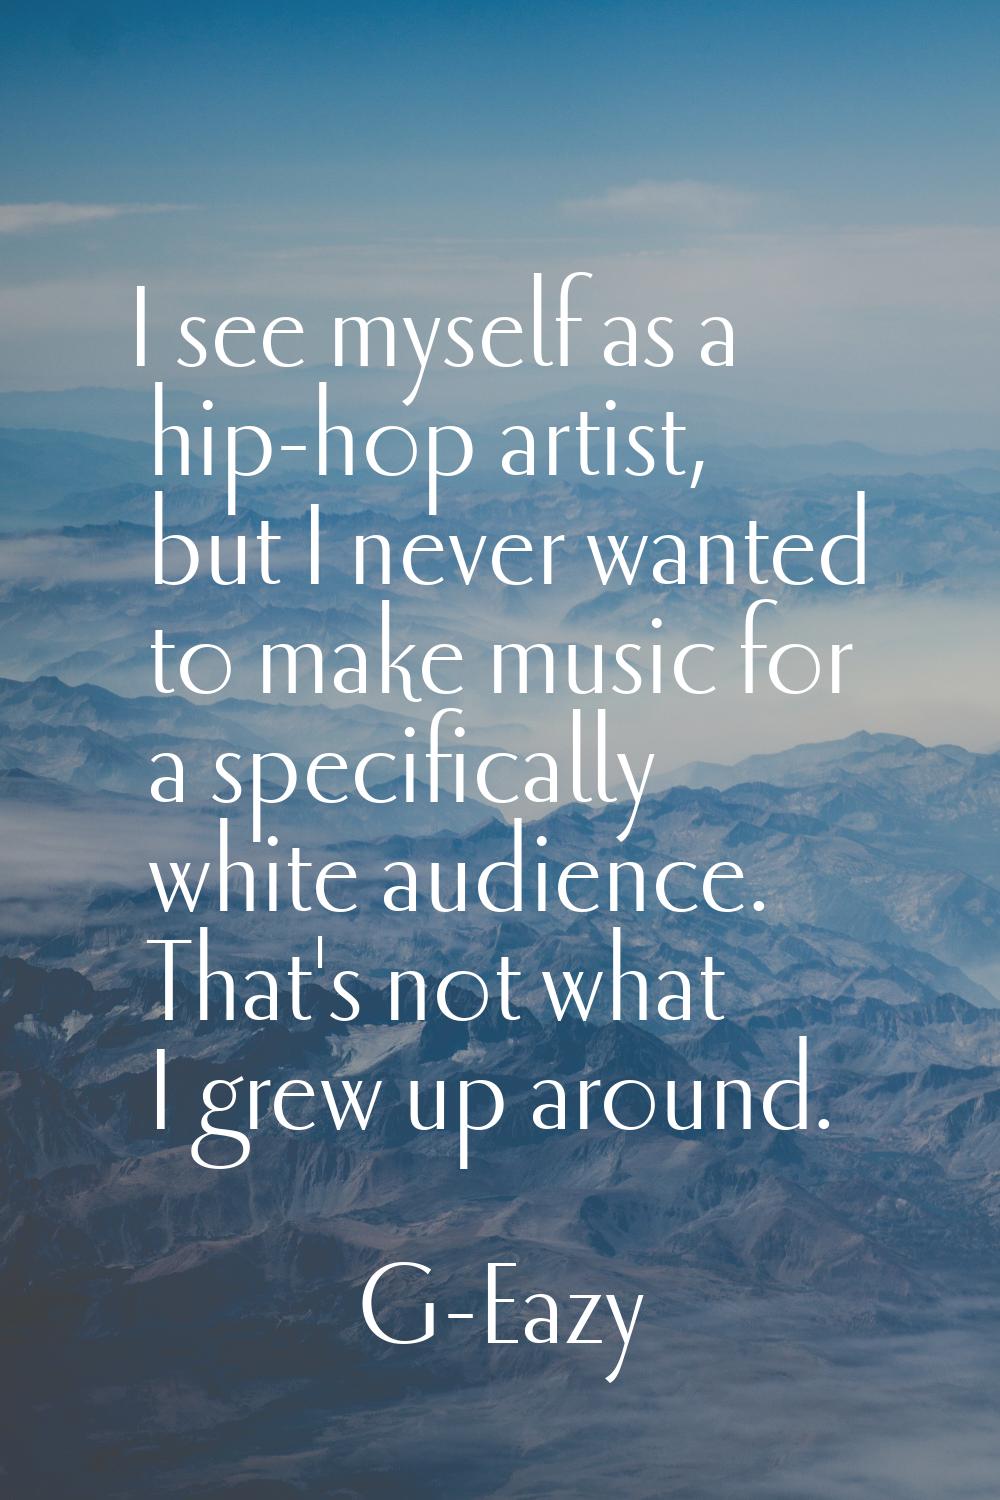 I see myself as a hip-hop artist, but I never wanted to make music for a specifically white audienc